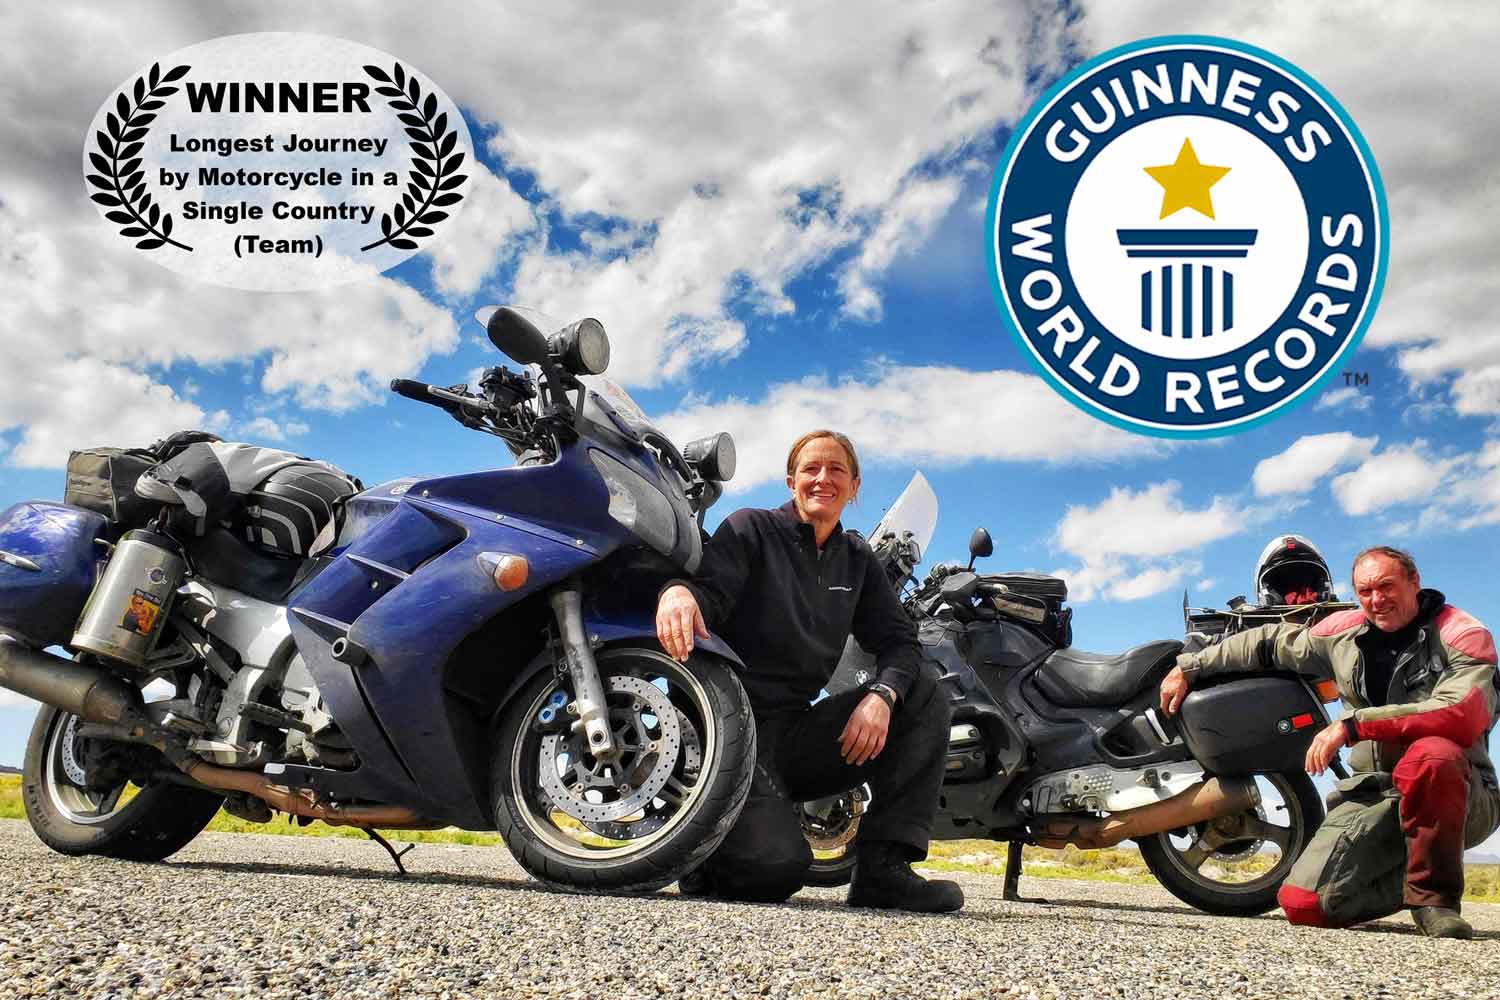 Wendy Crockett and Ian McPhee Awarded Guinness World Record for Longest Journey by Motorcycle in a Single Country (Team)